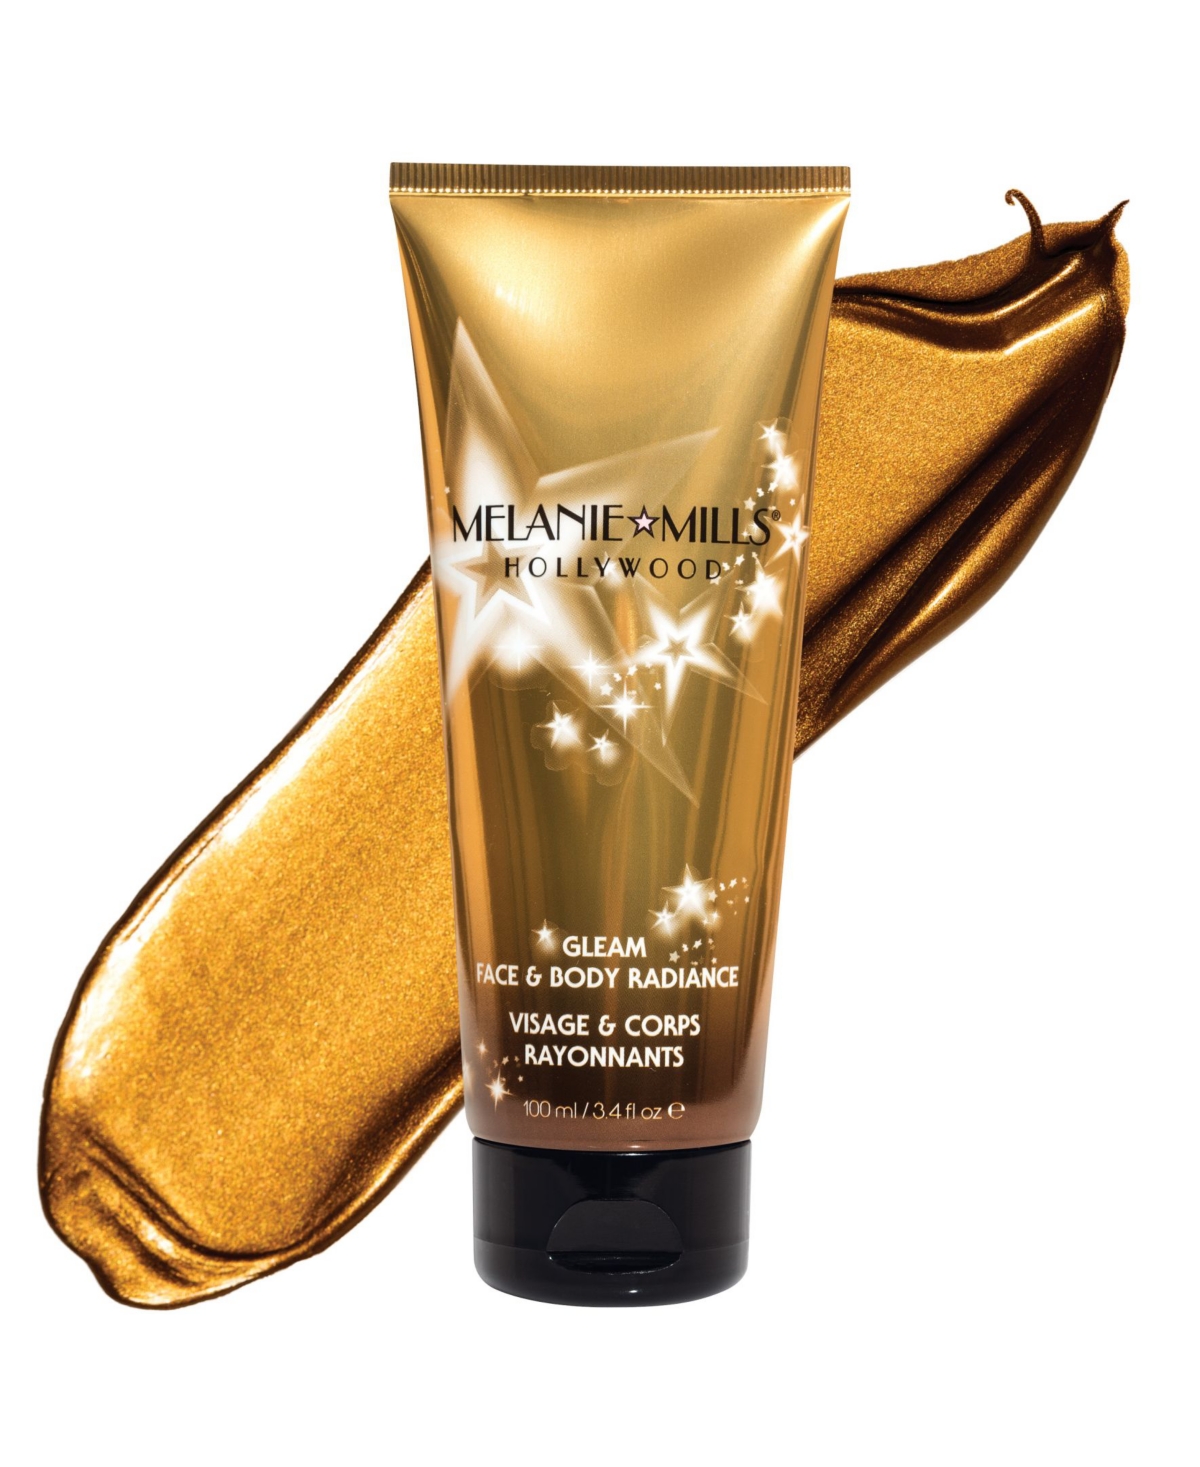 Melanie Mills Hollywood Gleam Face and Body Radiance All in One Makeup, Moisturizer and Glow, 3.4 oz